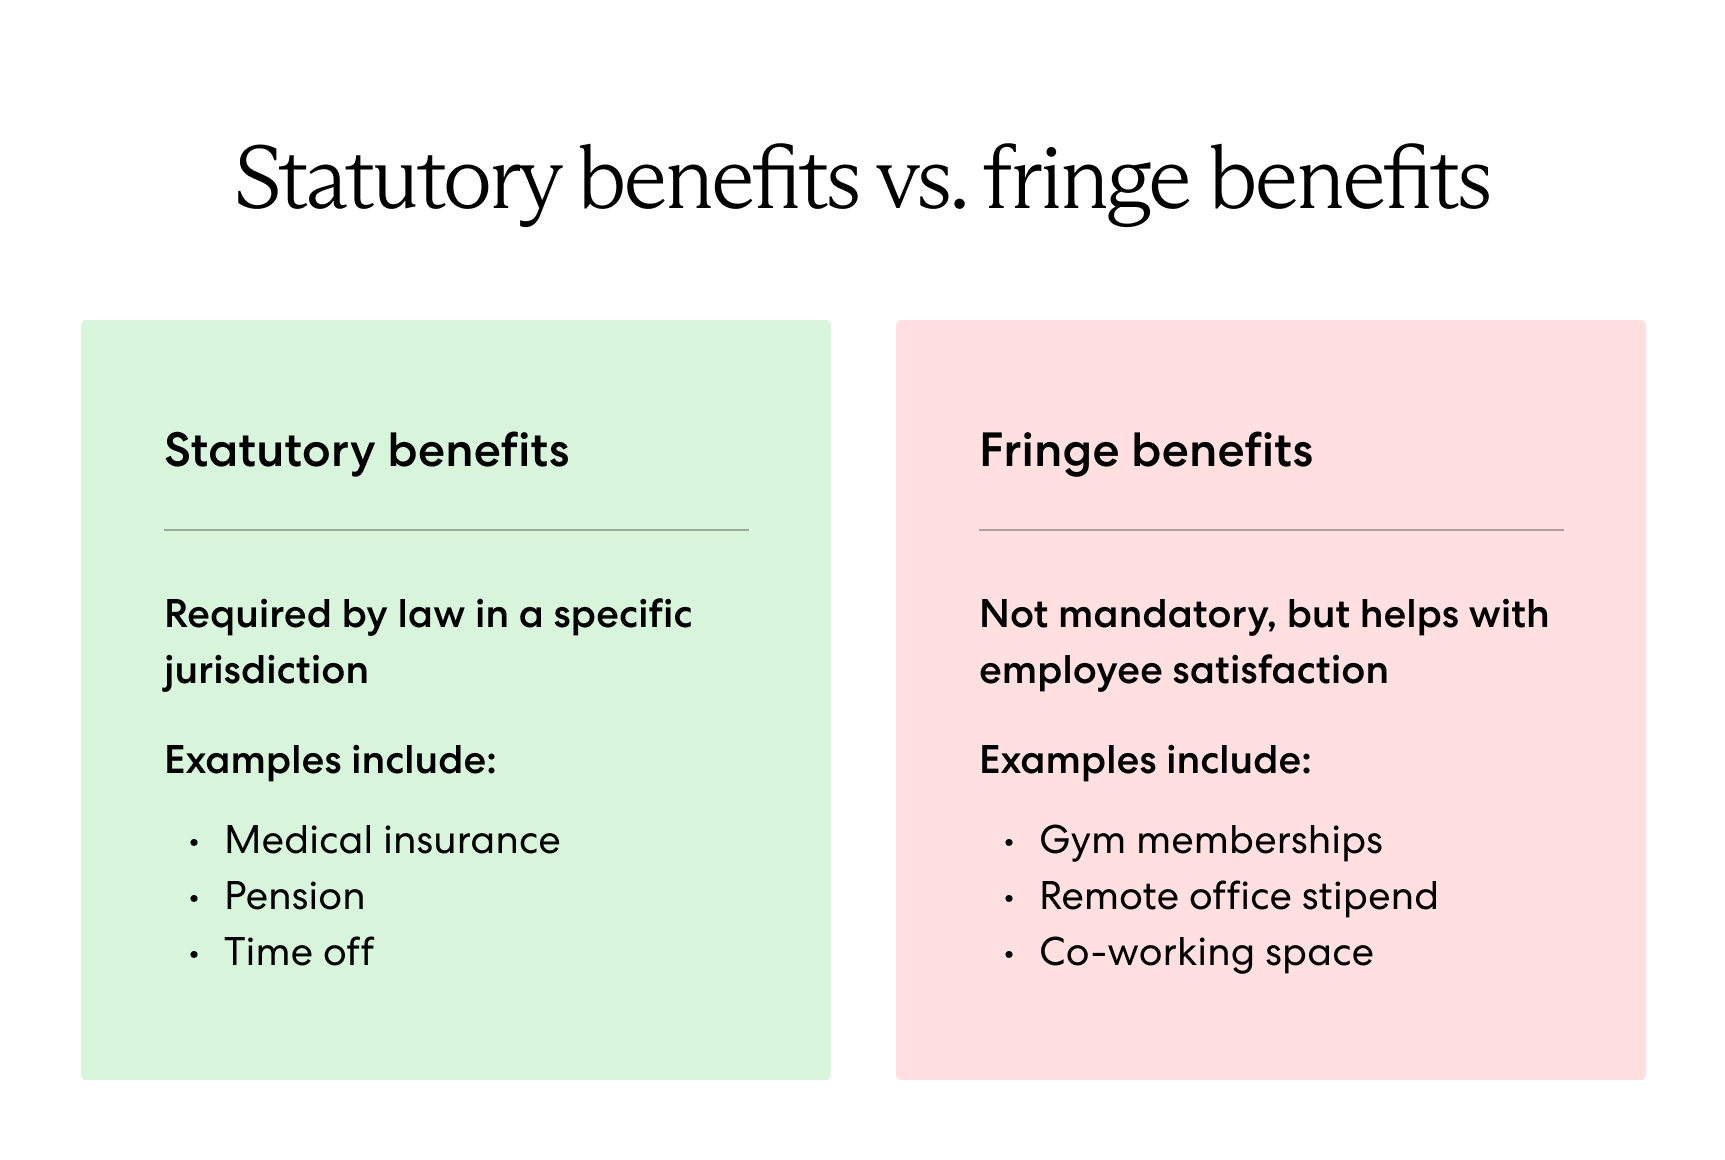 Statutory benefits are required where as fringe benefits are not.